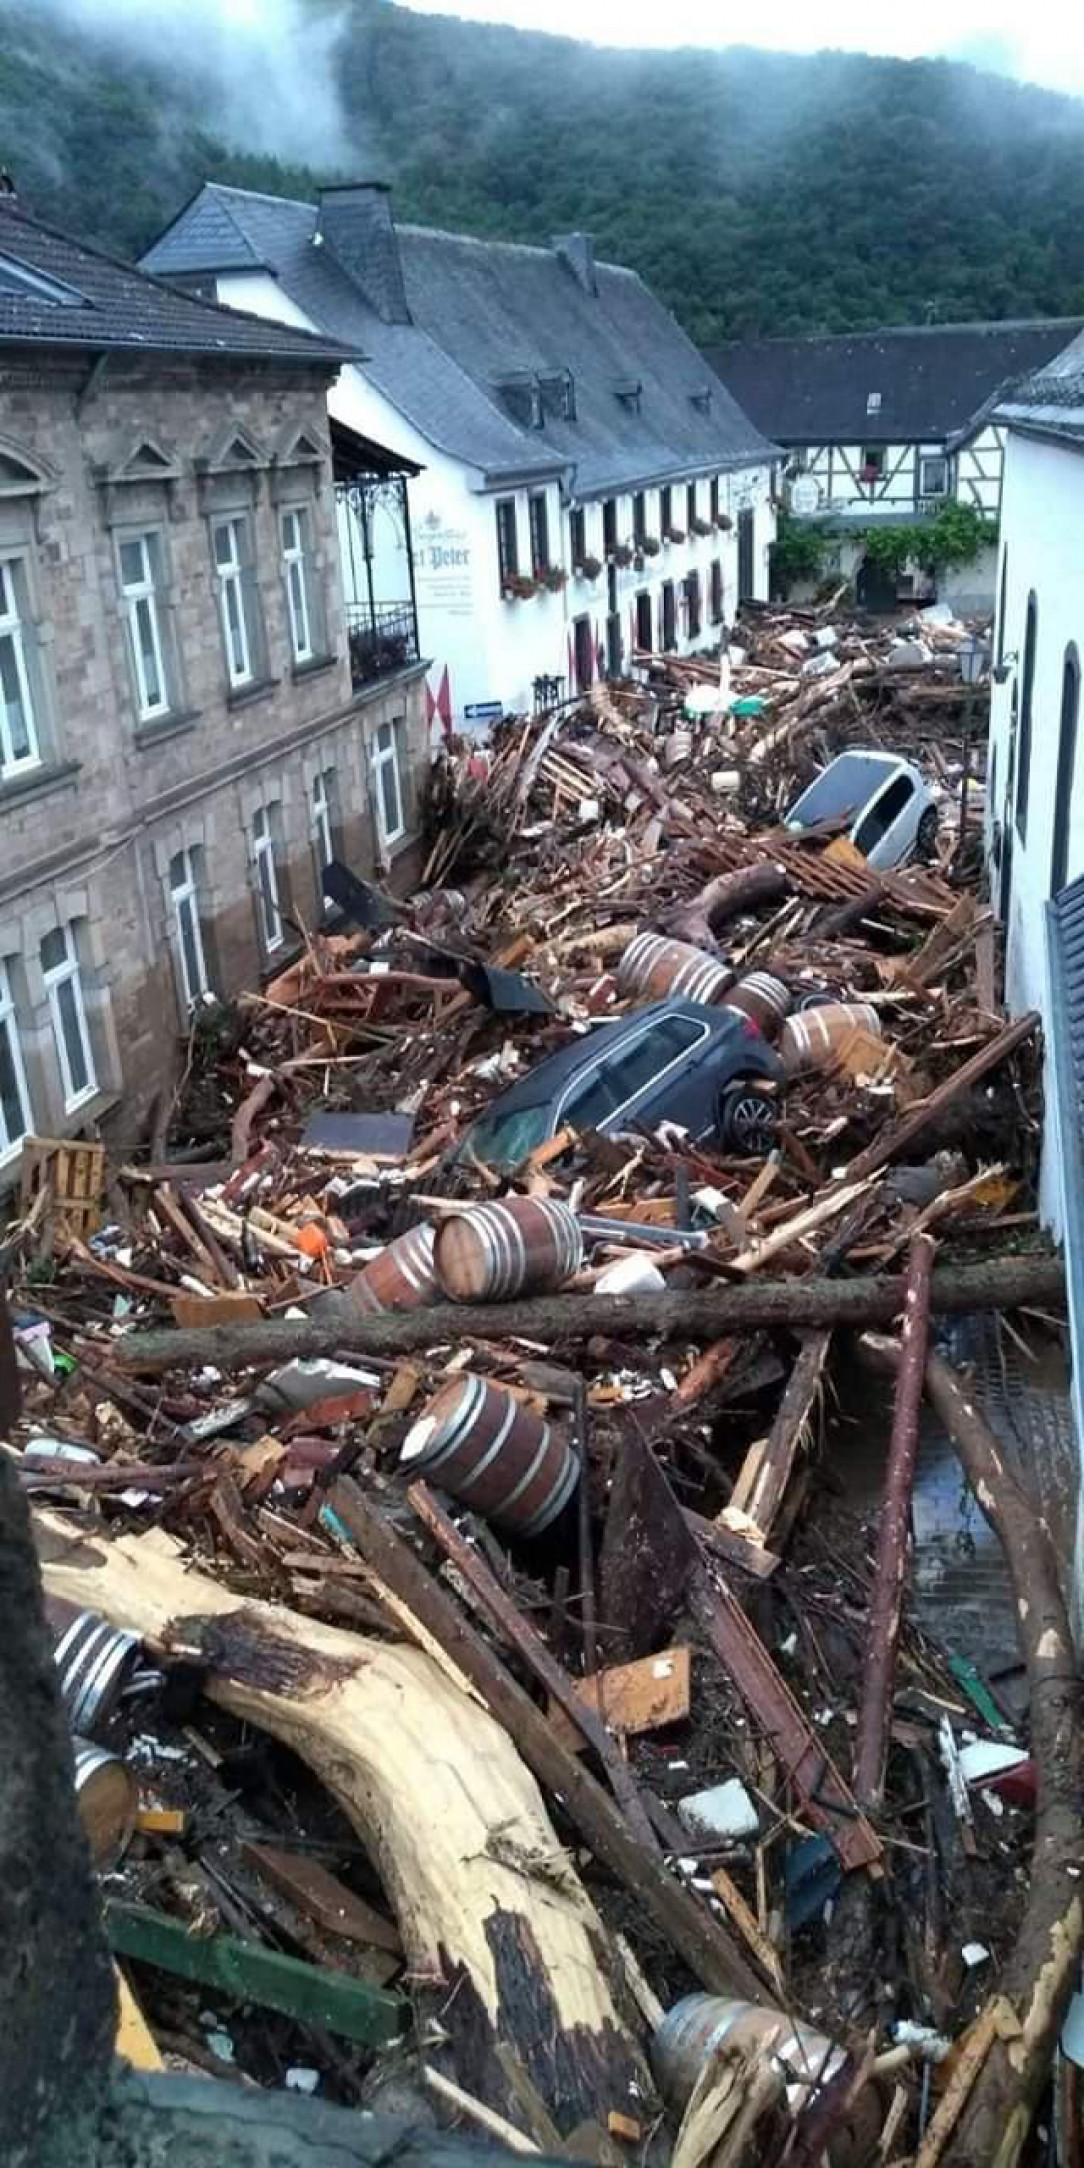 The aftermath of recent flooding in Germany